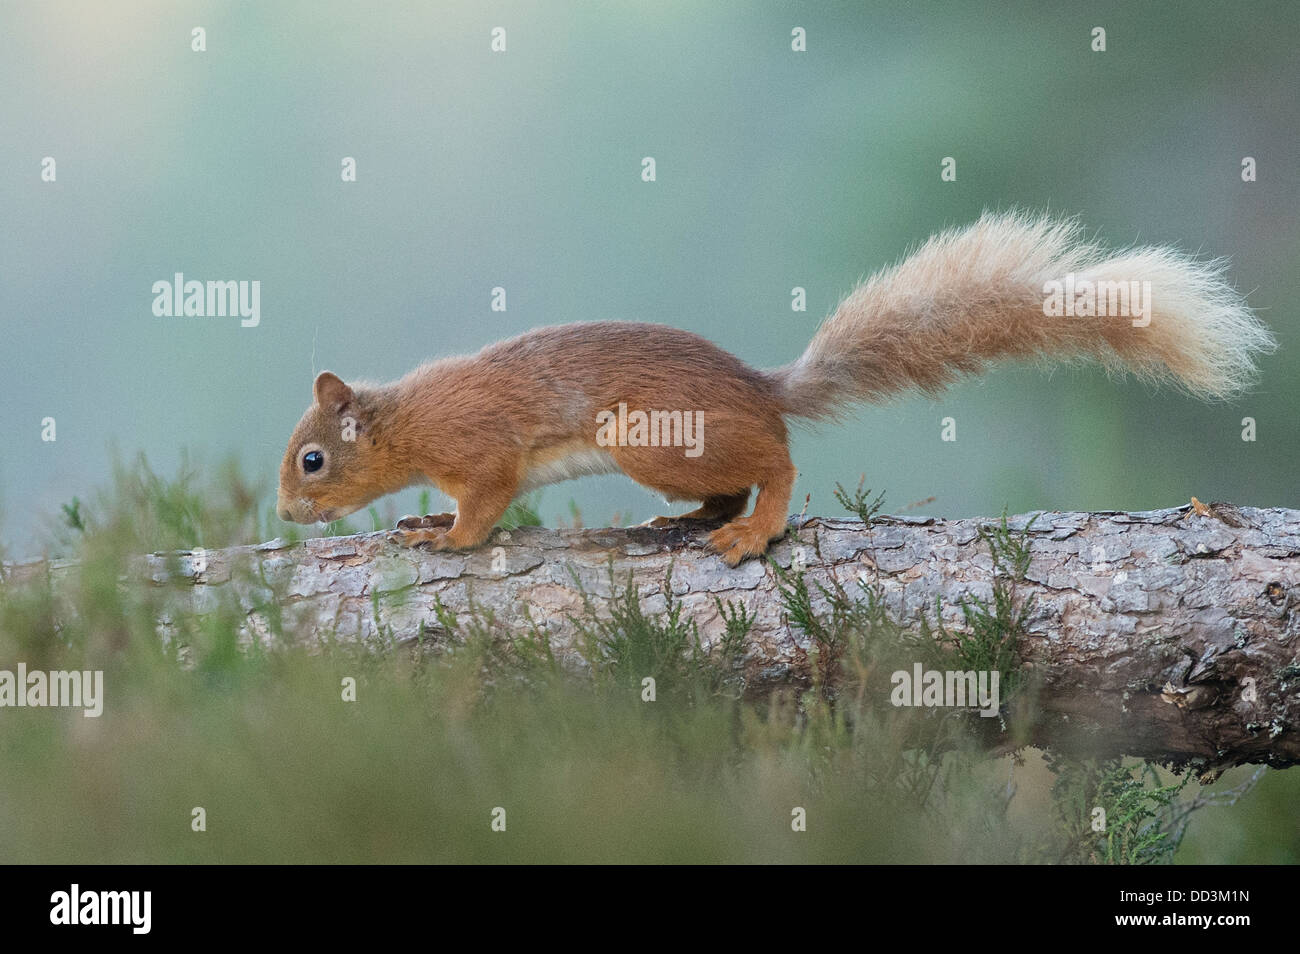 A Red Squirrel on a branch Stock Photo